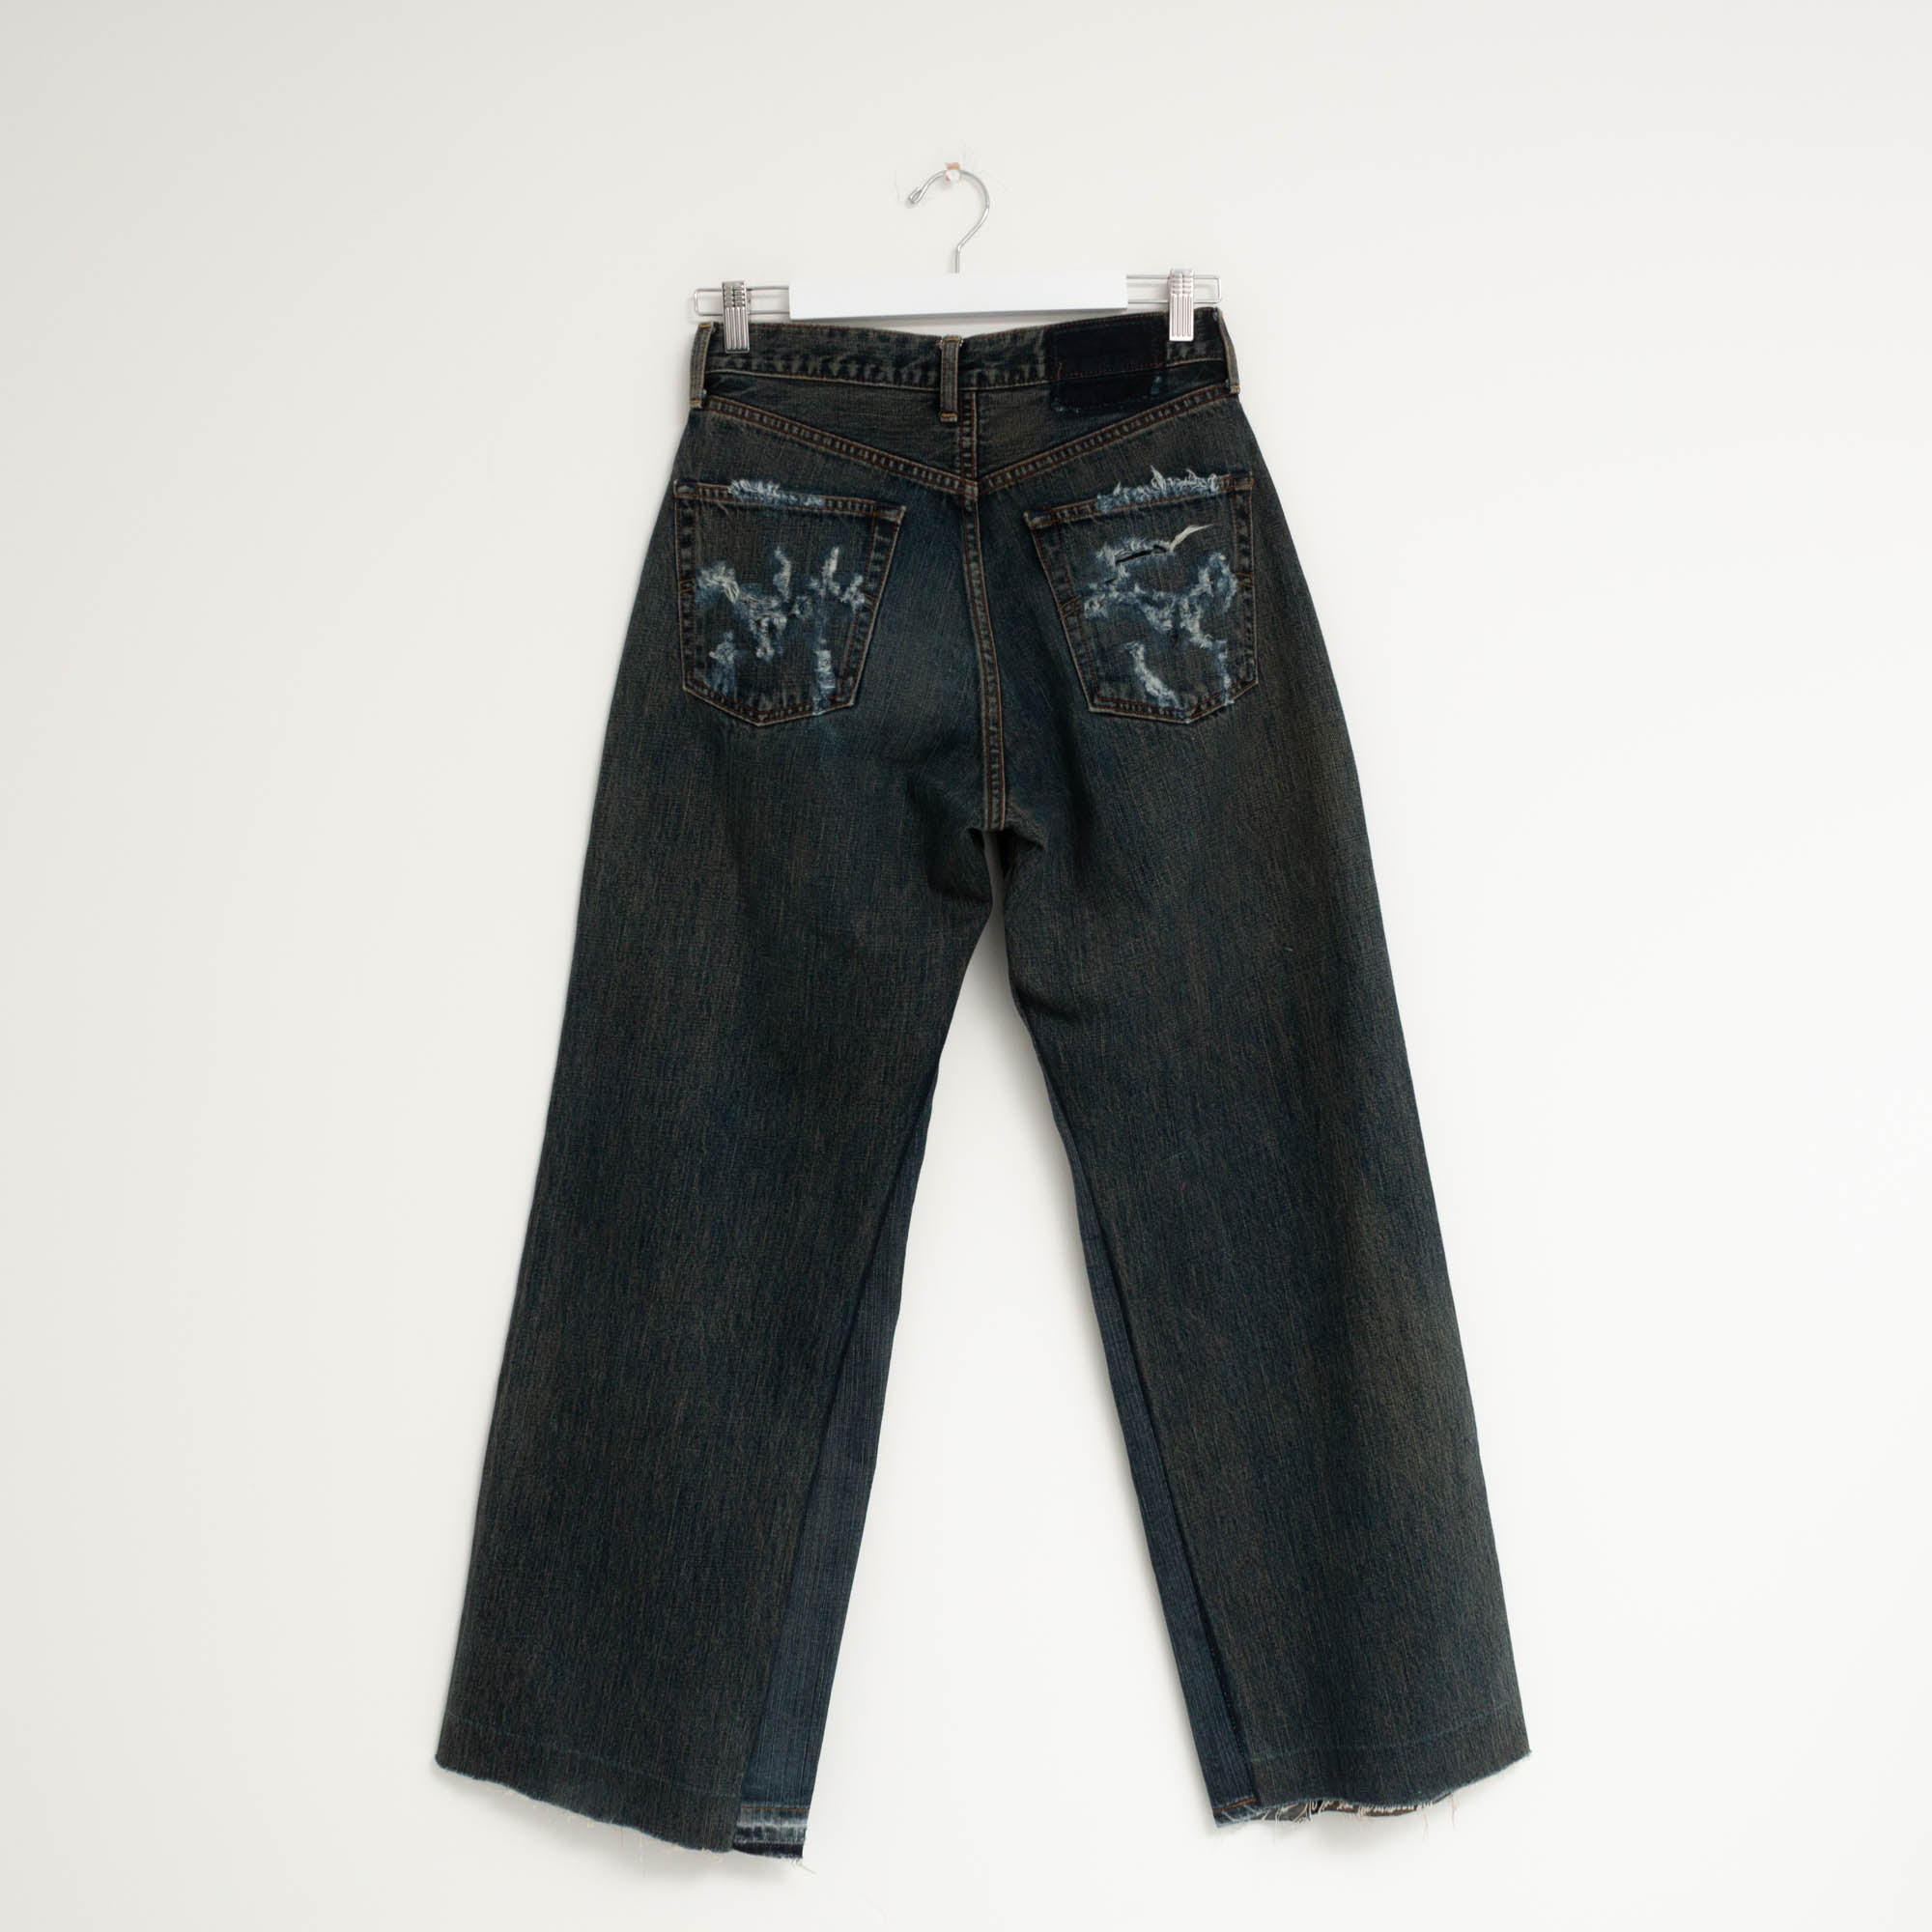 "FLARE" Jeans W29 L31